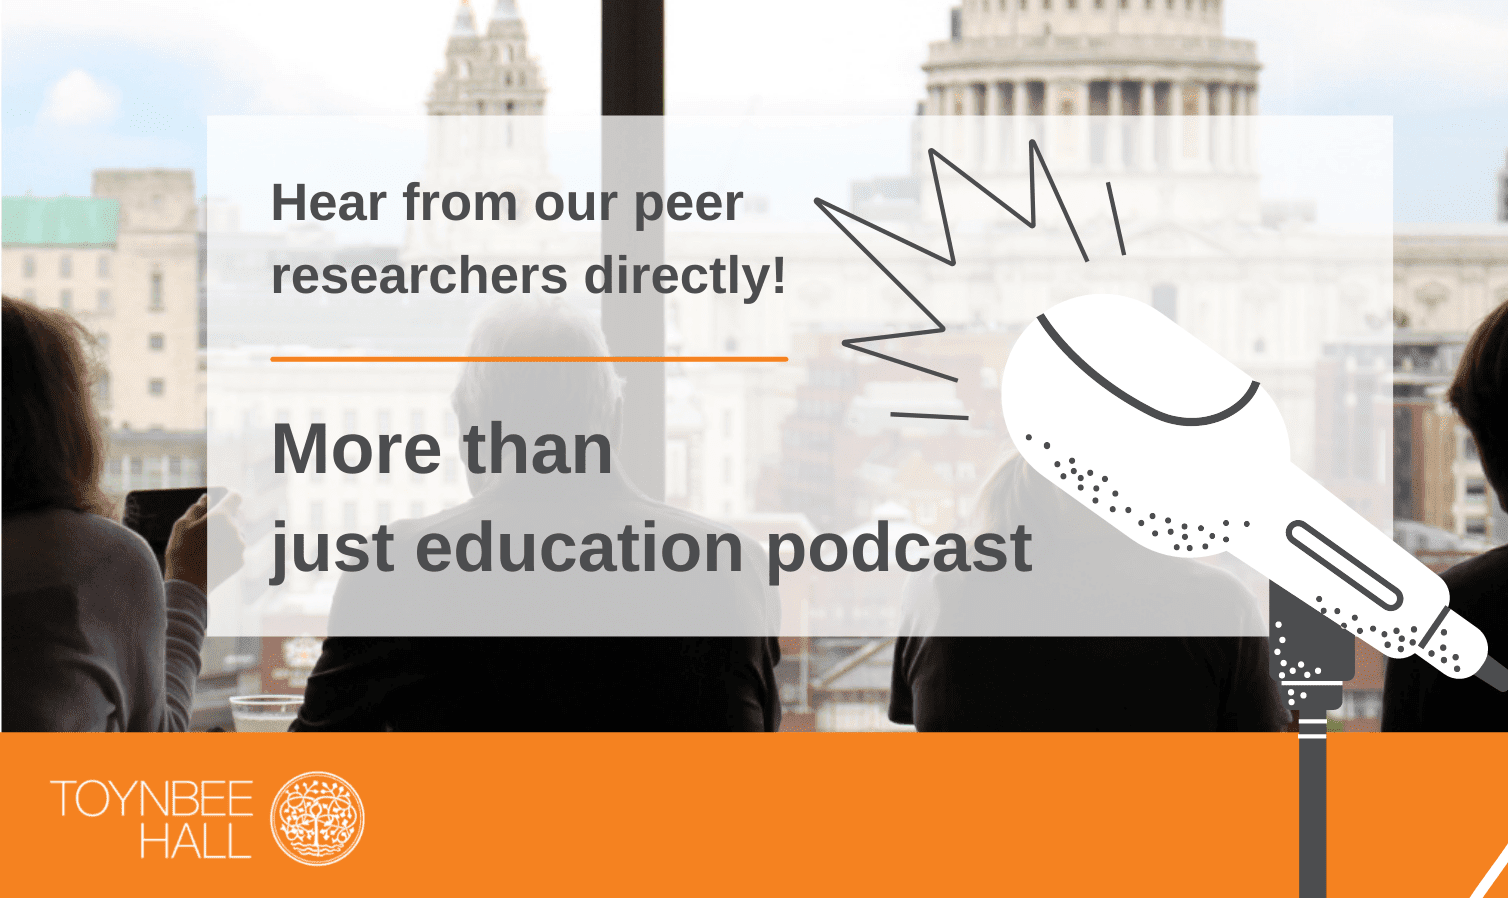 More than just education podcast